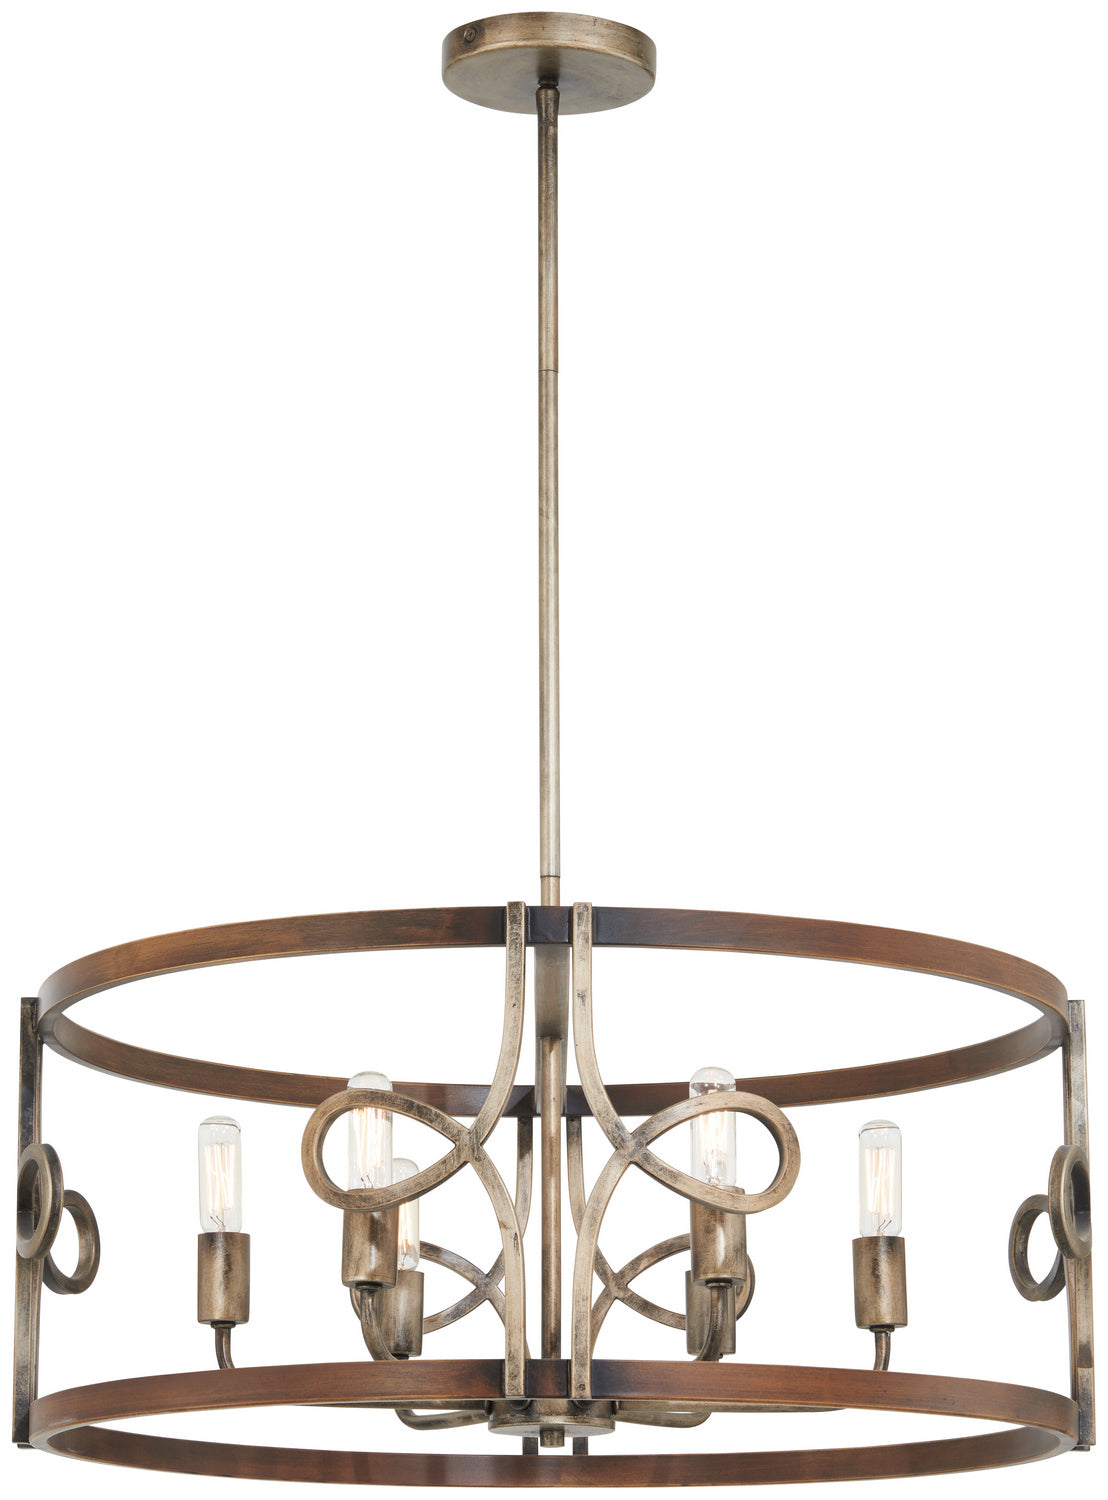 Yorkville By Robin Baron Six Light Pendant in Aged Darkwood With Silver Patina